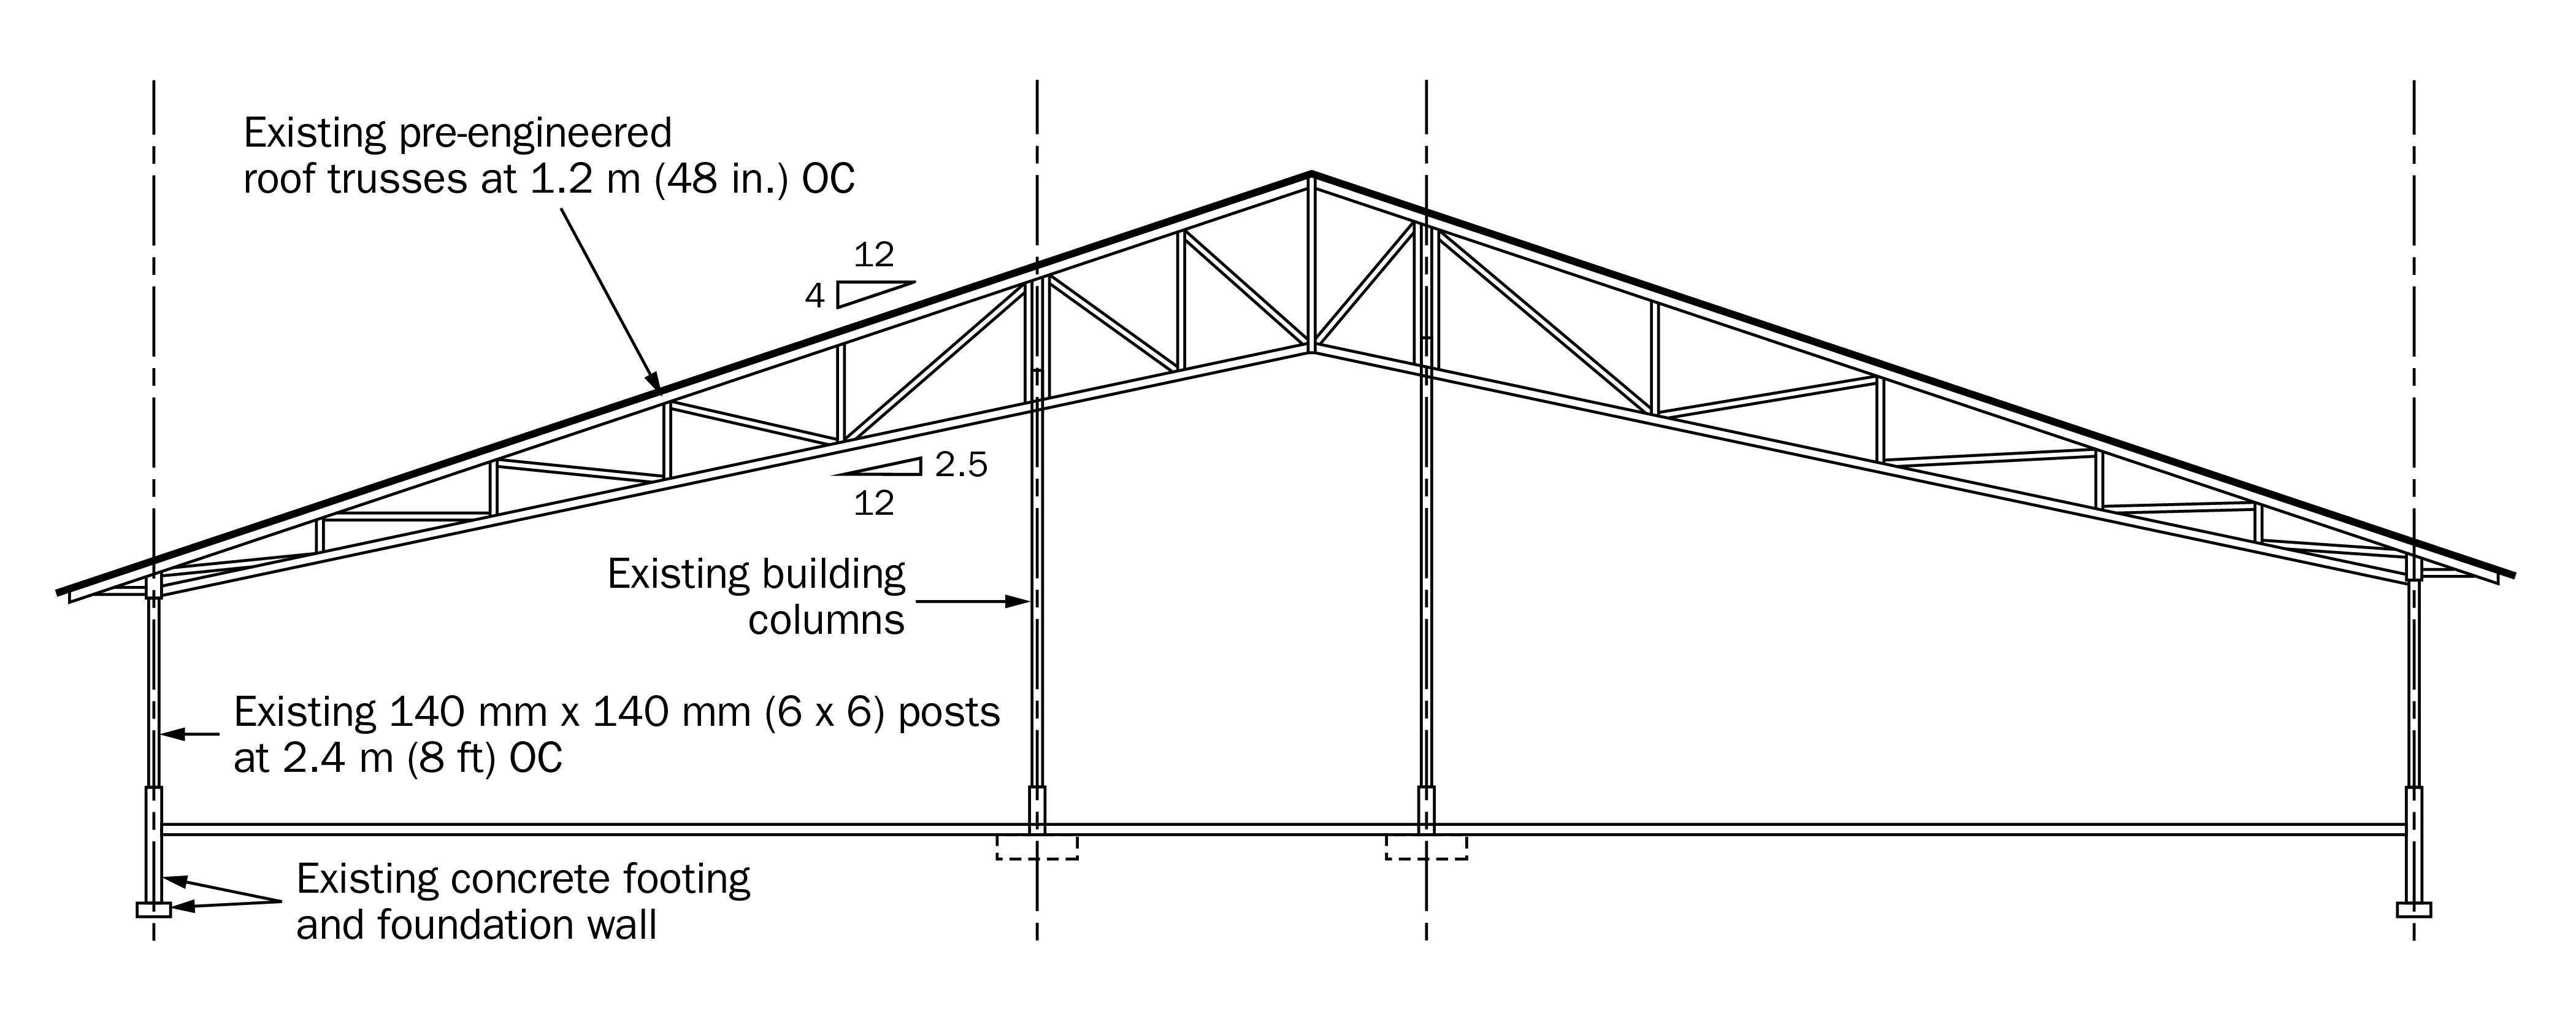 a truss with a sloped bottom chord where forces in the members may be higher and there is less room for reinforcing